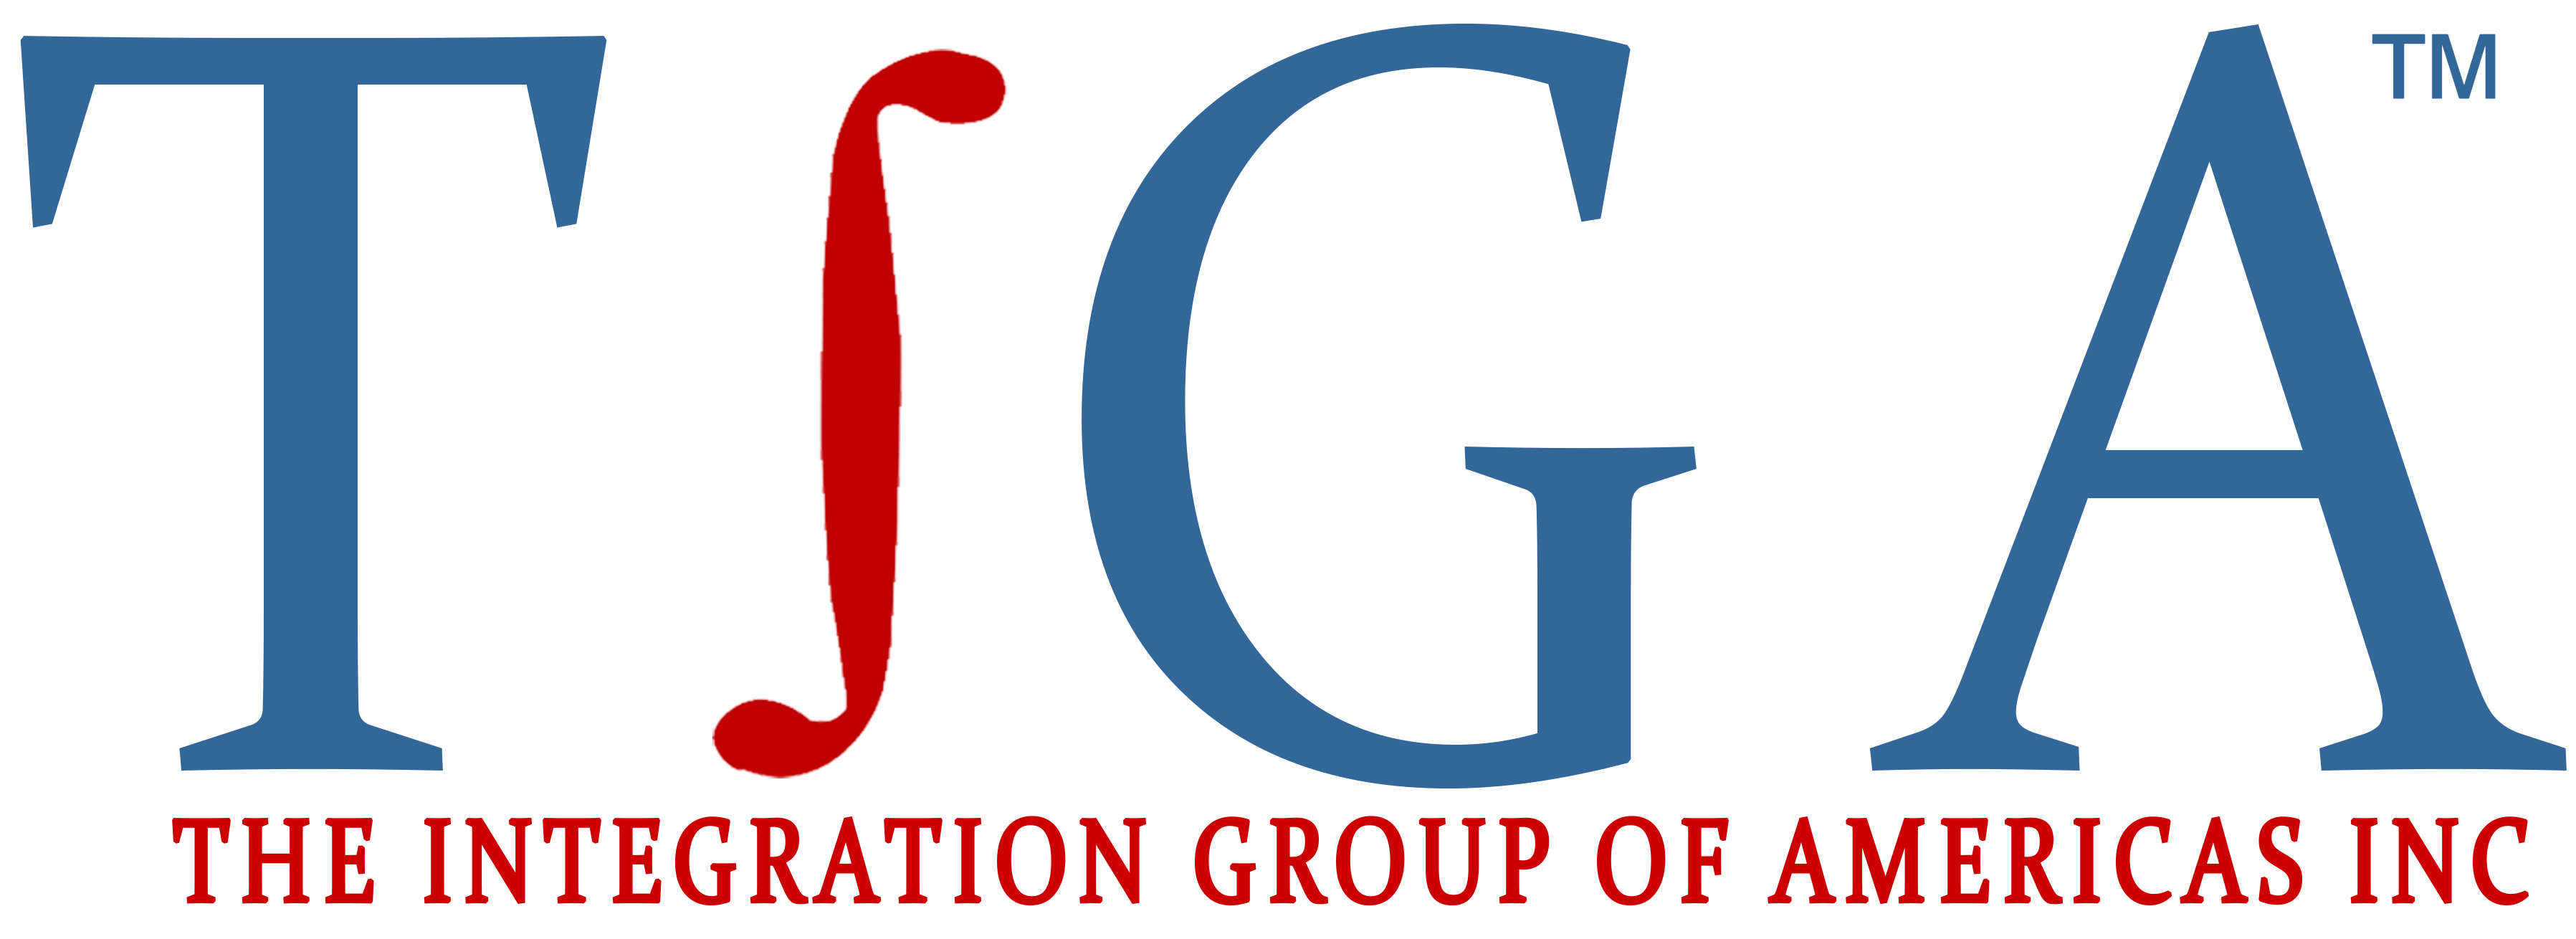 The Integration Group of Americas, Inc.